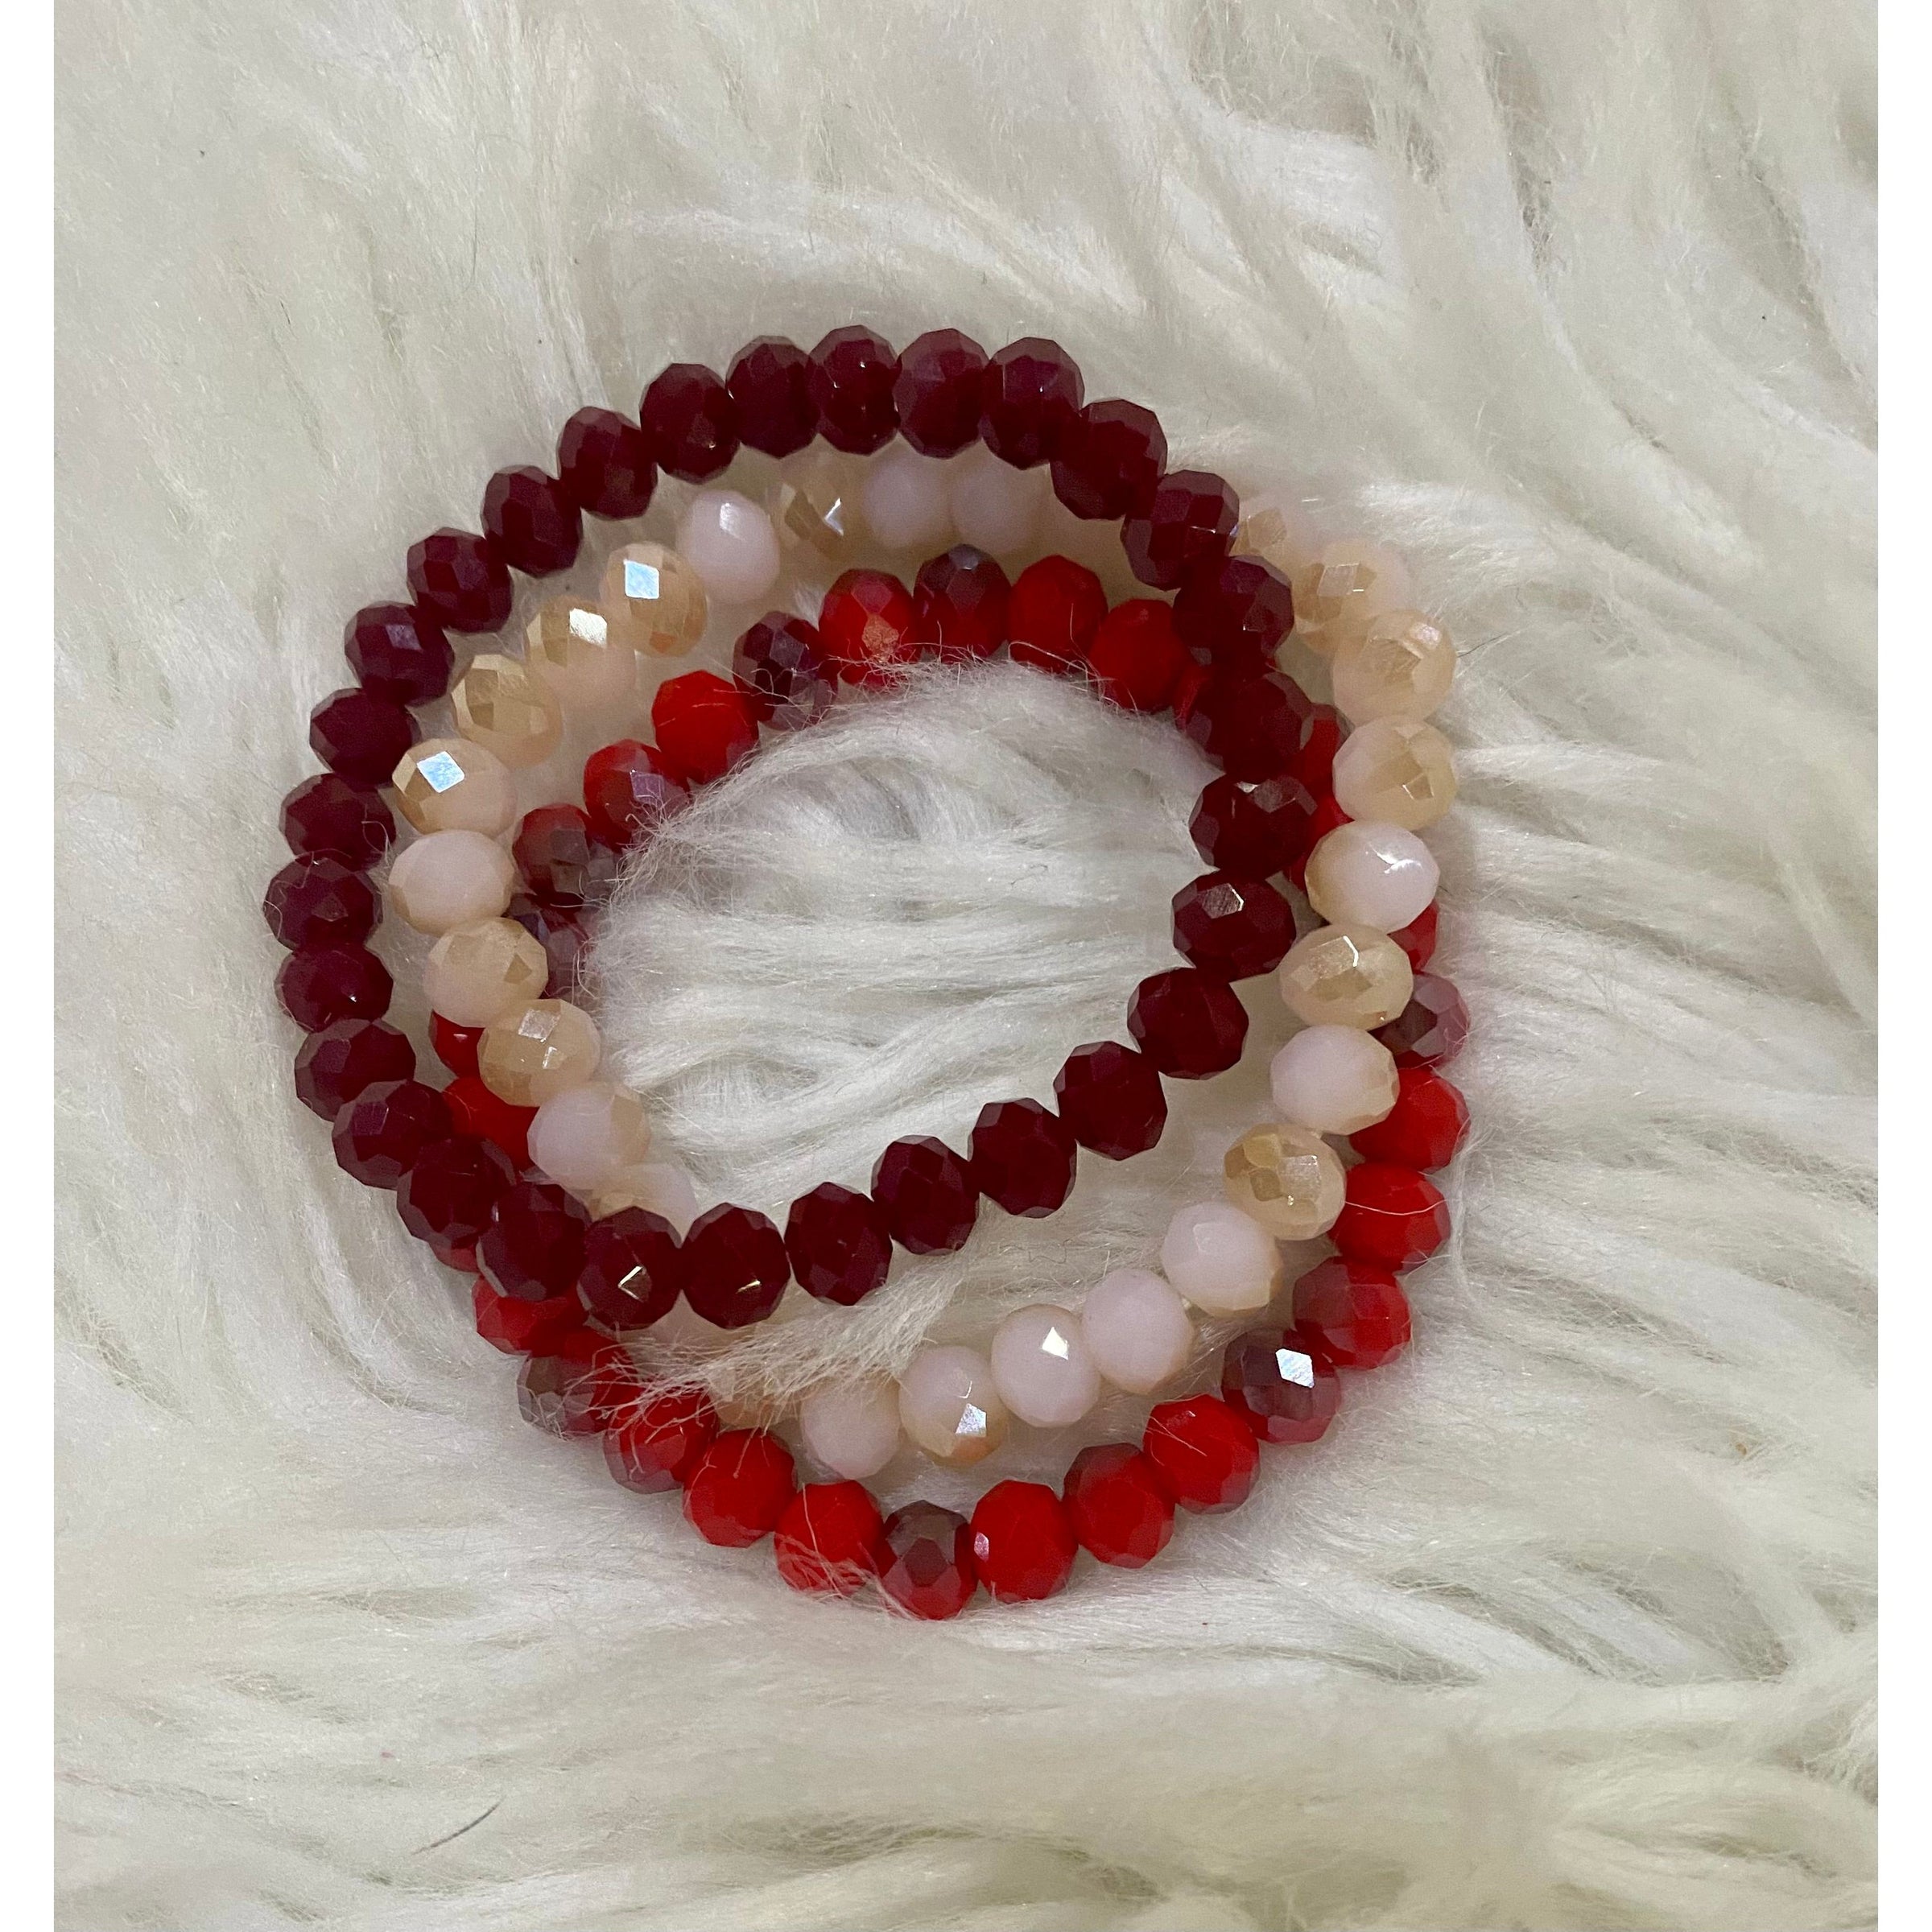 3 Deep Red, Multi Red and Peach Beaded Stretchy Bracelets